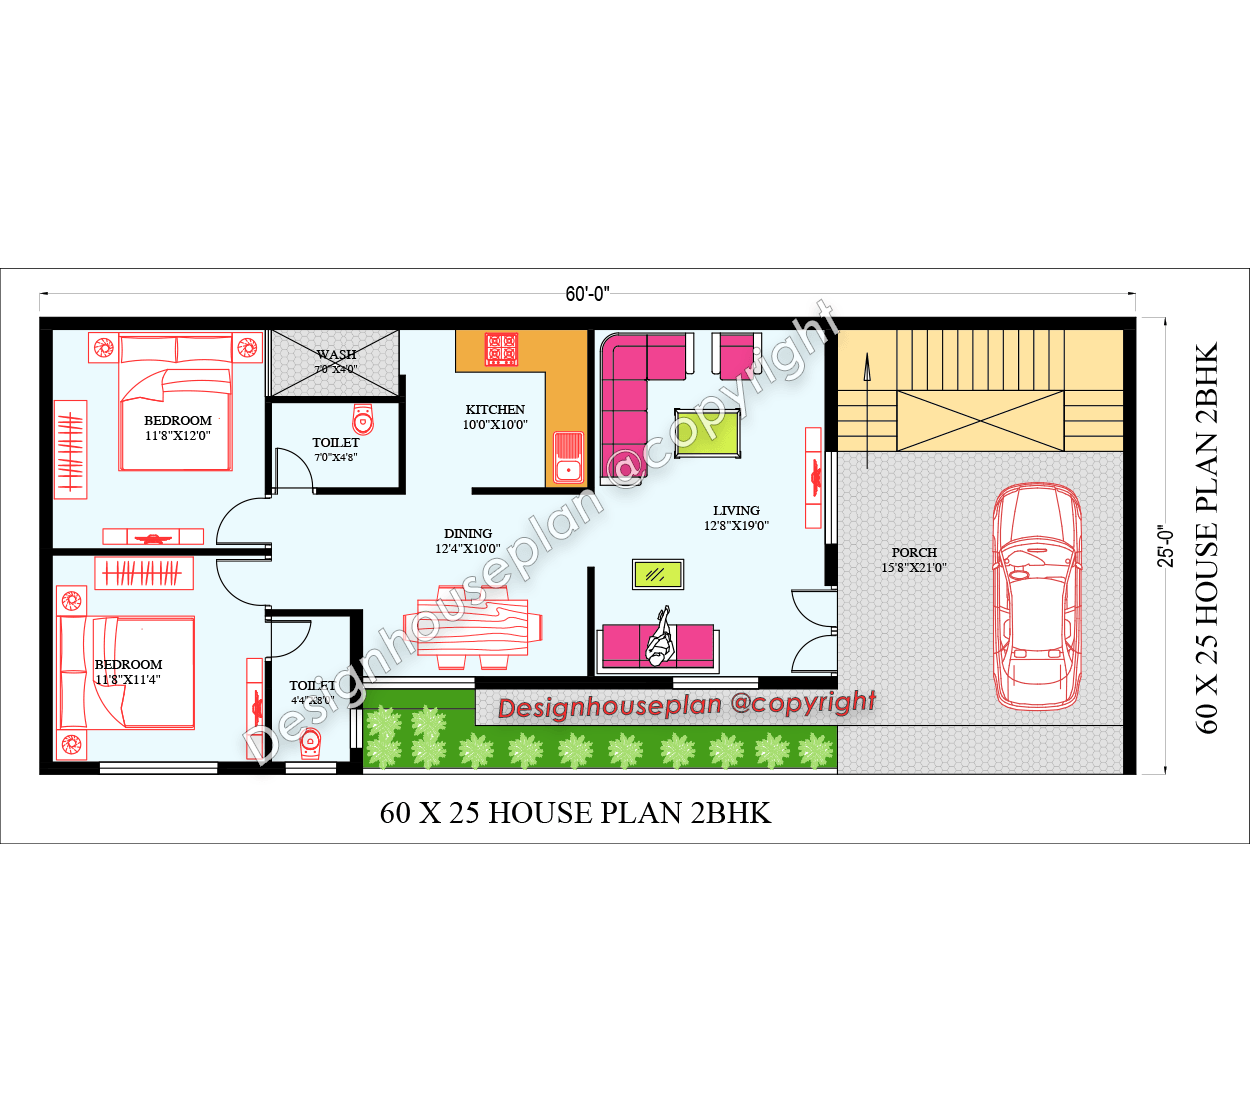 60x25 affordable house design